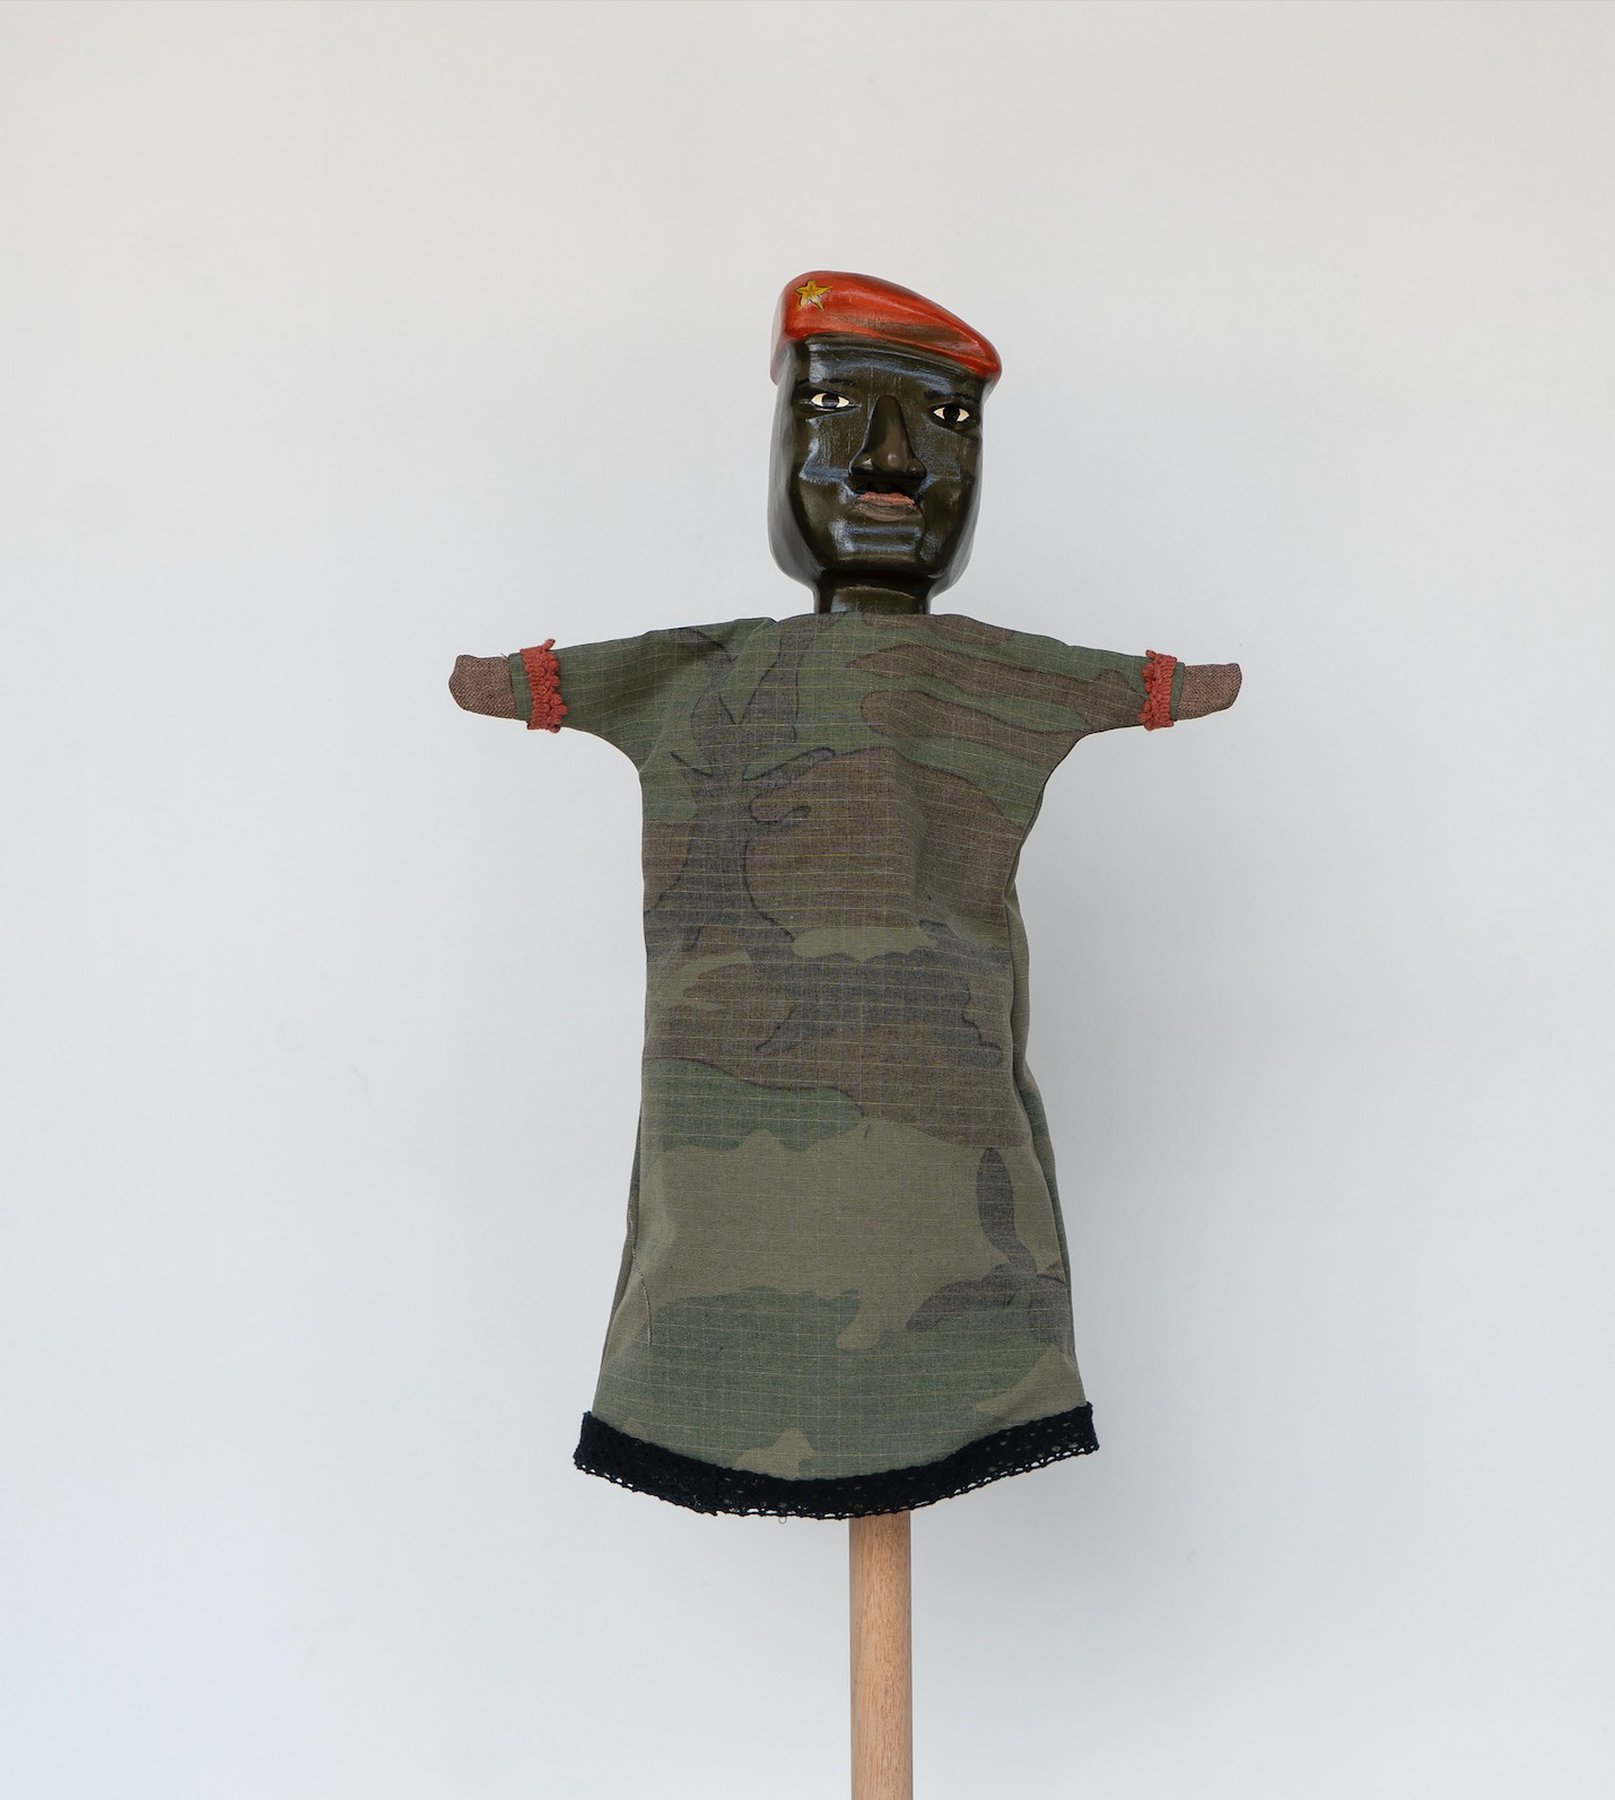 Daniela Ortiz, The Brightness of Greedy Europe, 2022, wood hand-carved, sewn, knitted and embroidered costumes (25 cm) puppet - Thomas Sankara